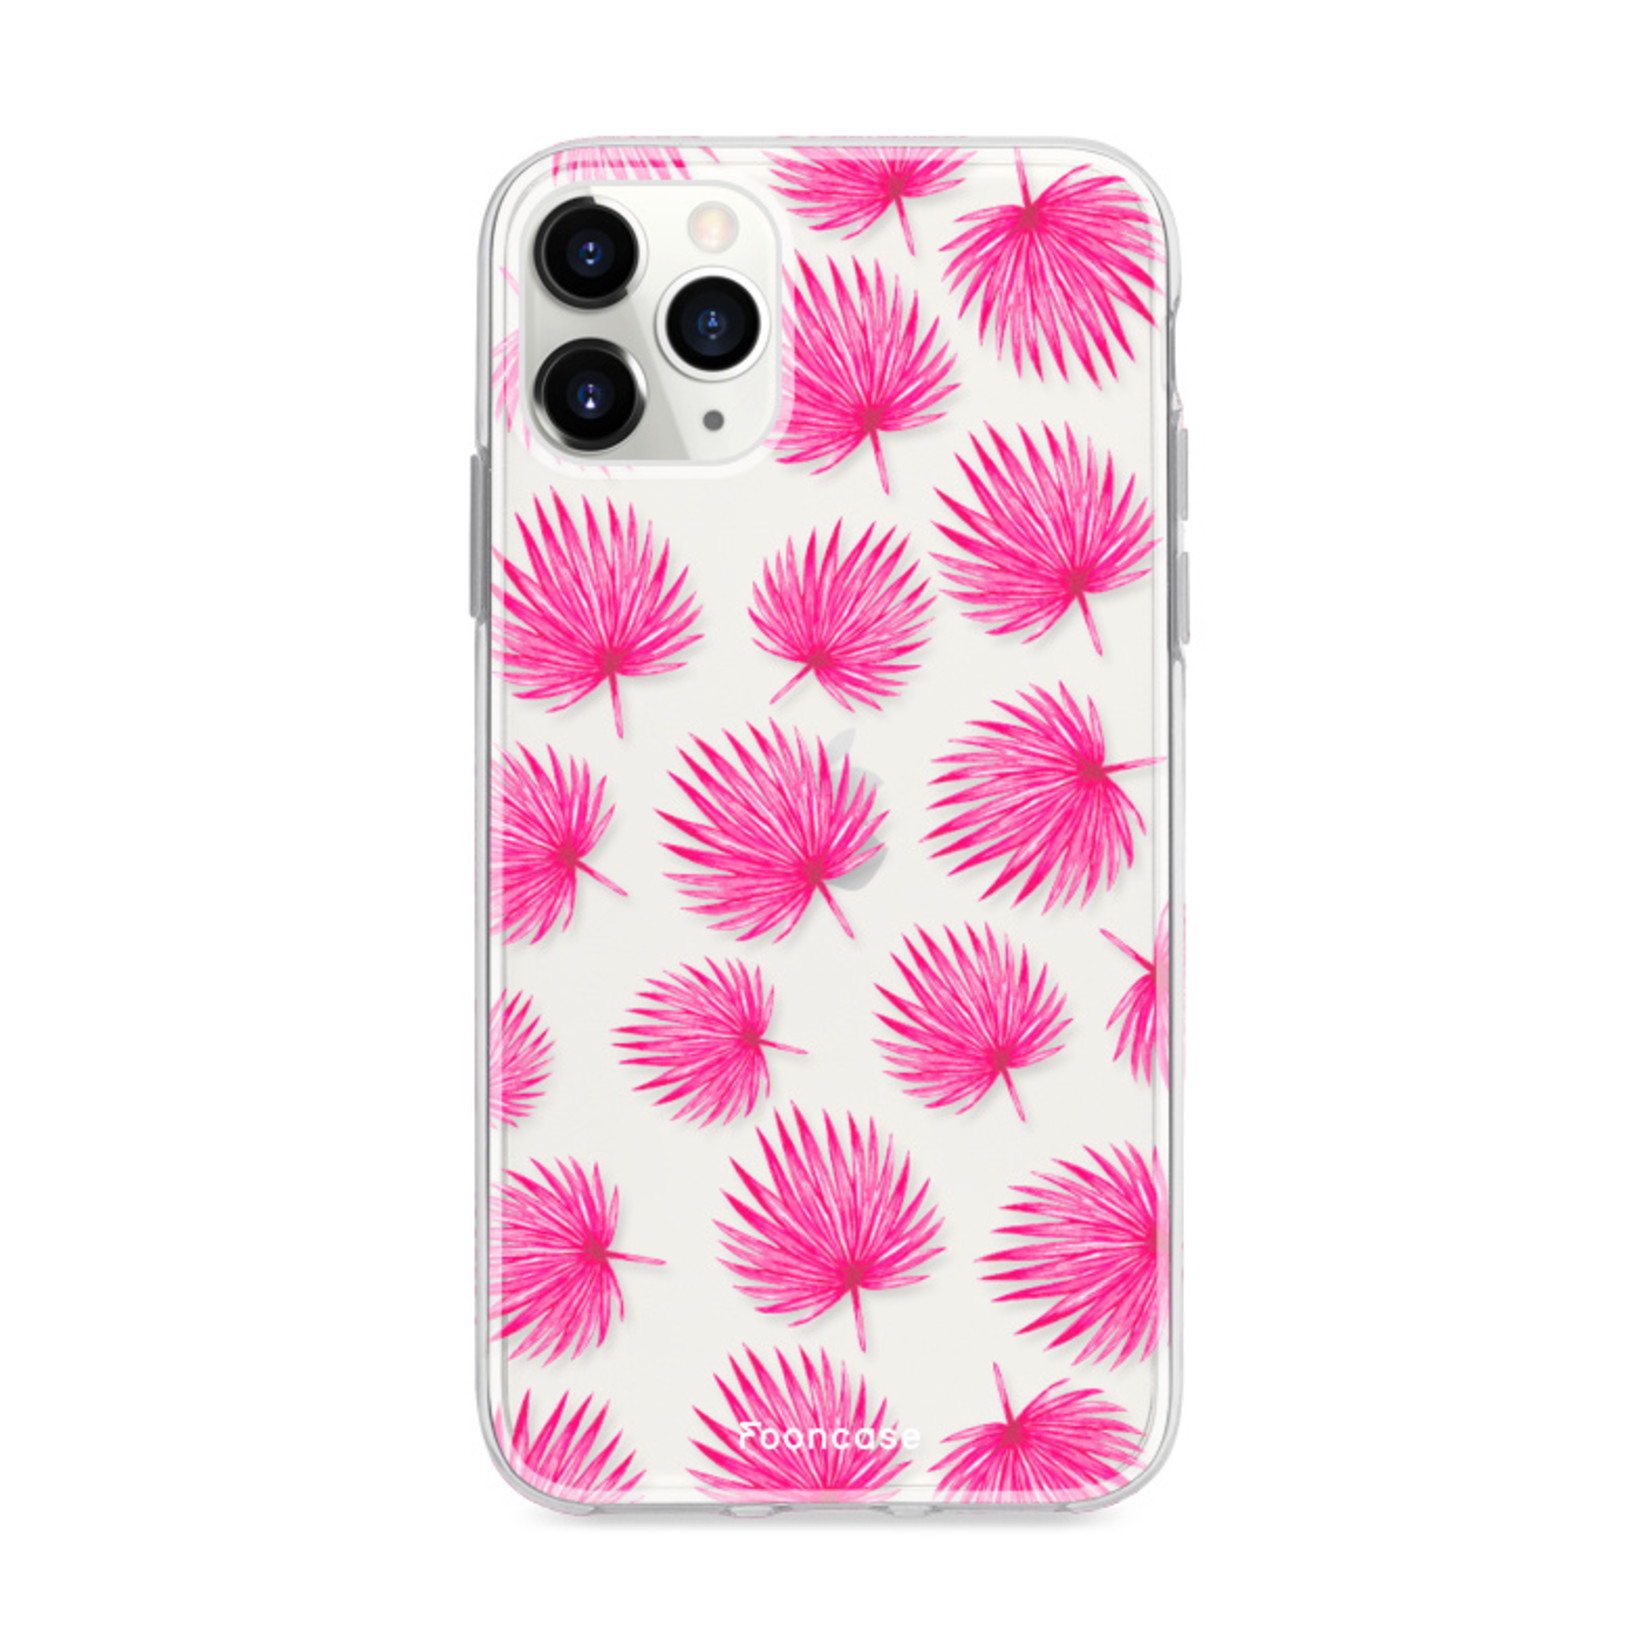 FOONCASE iPhone 12 Pro Max hoesje TPU Soft Case - Back Cover - Pink leaves / Roze bladeren